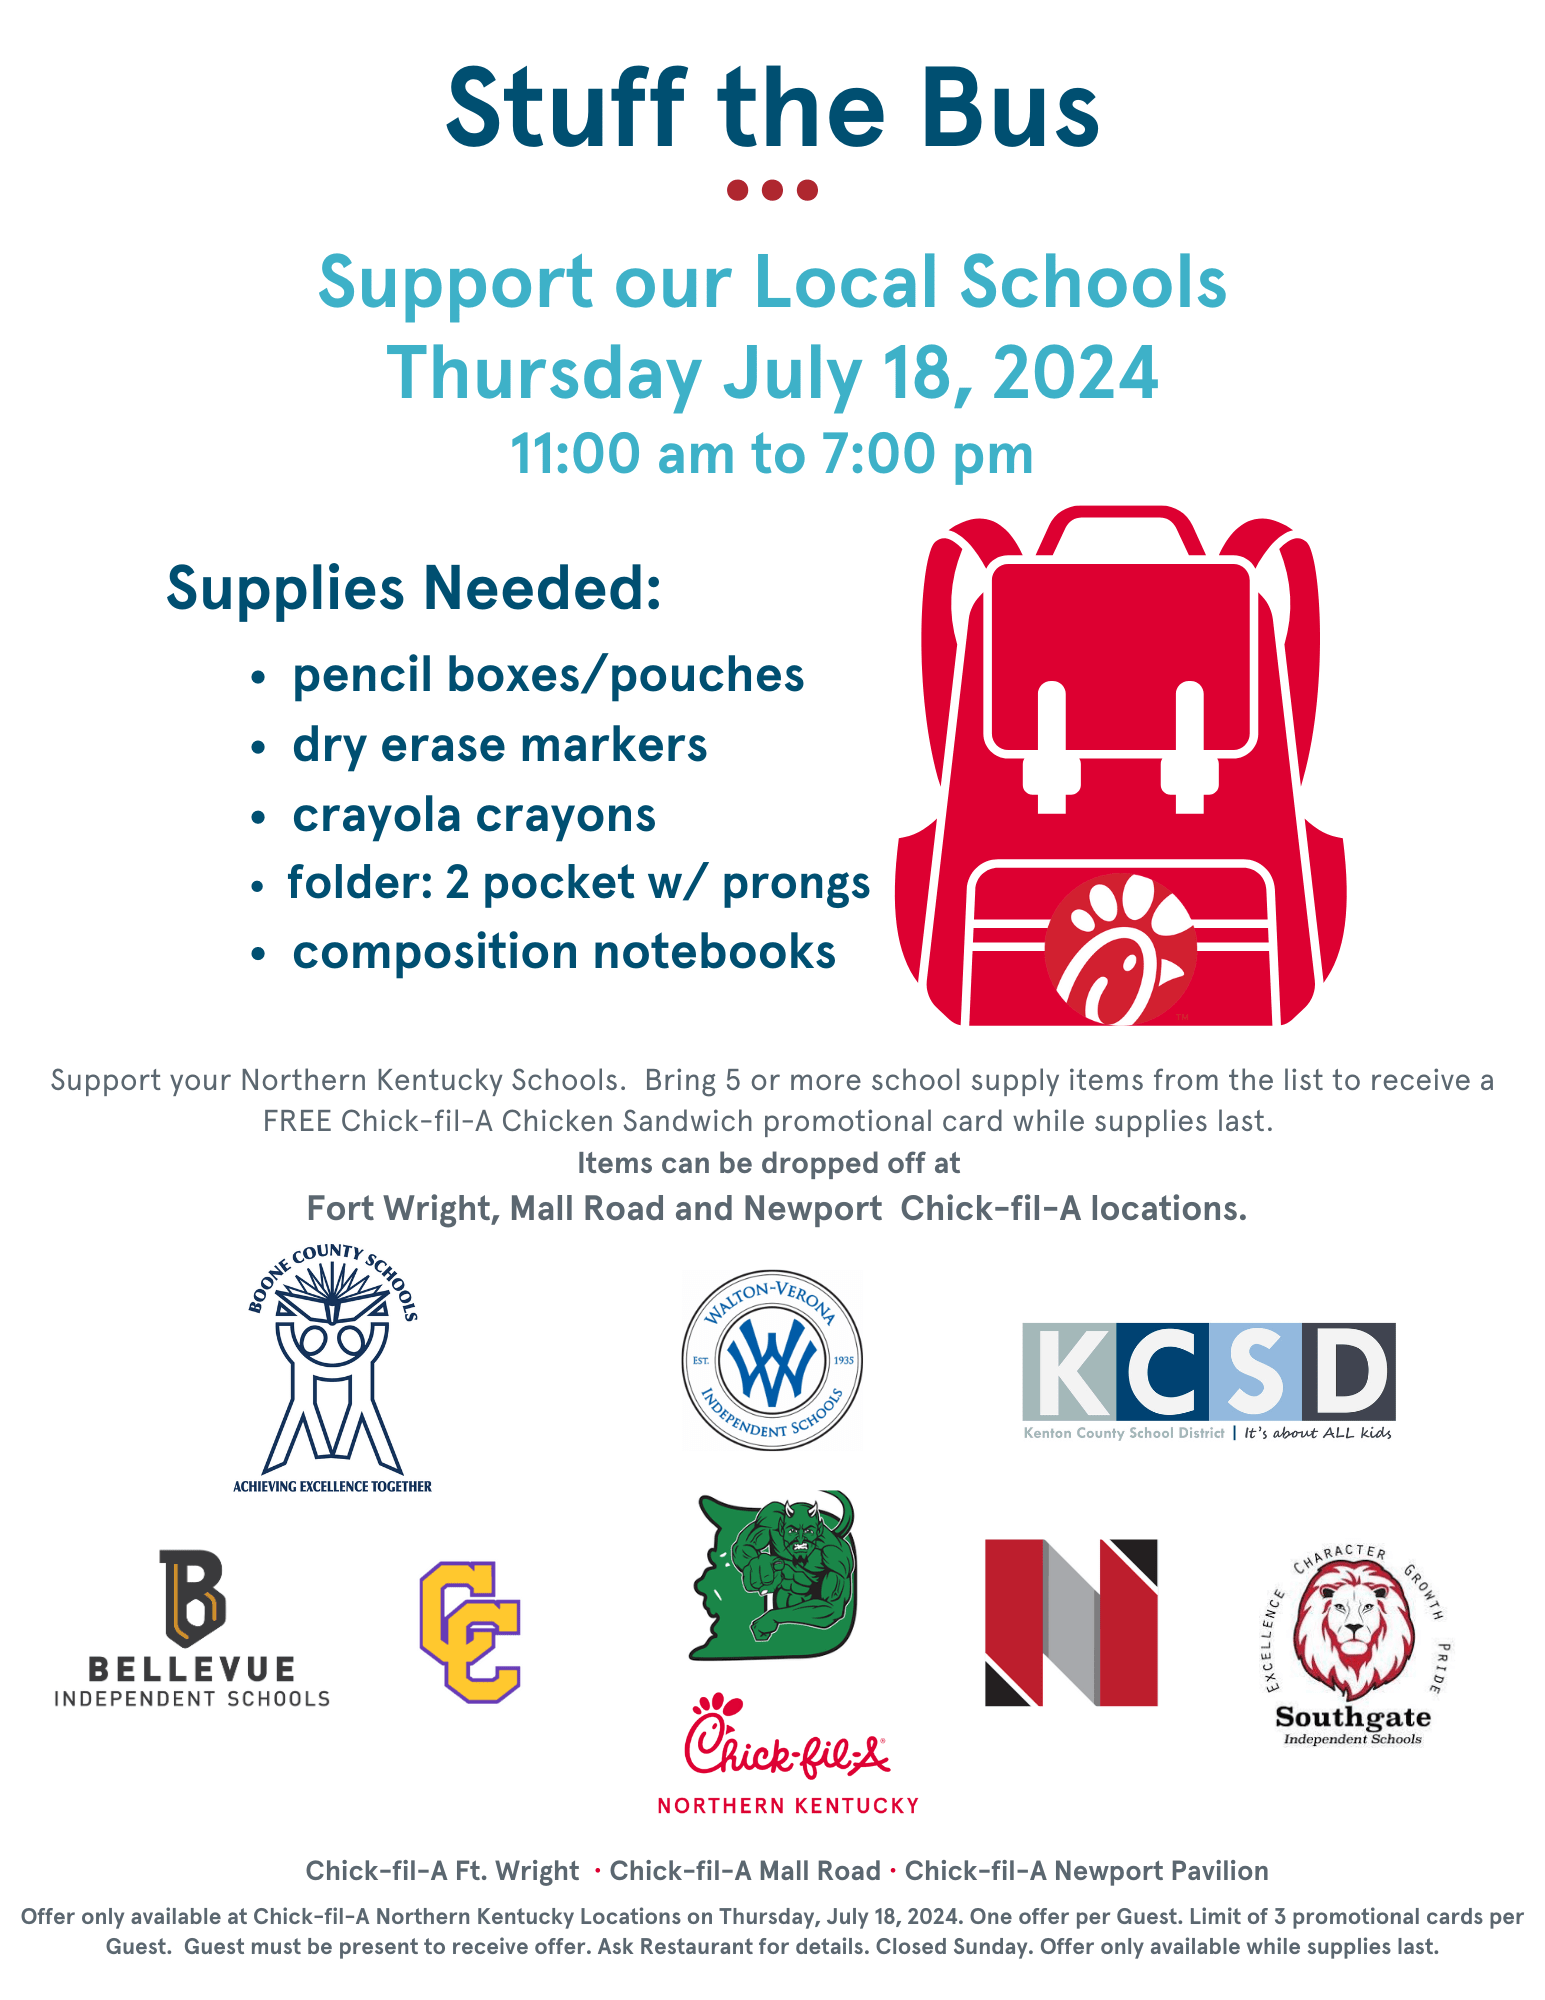 NKY Chick-fil-A Stuff The Bus Challenge flyer listing school supplies and participating school districts. Supply drive is July 18th 11 a.m - 7 p.m.